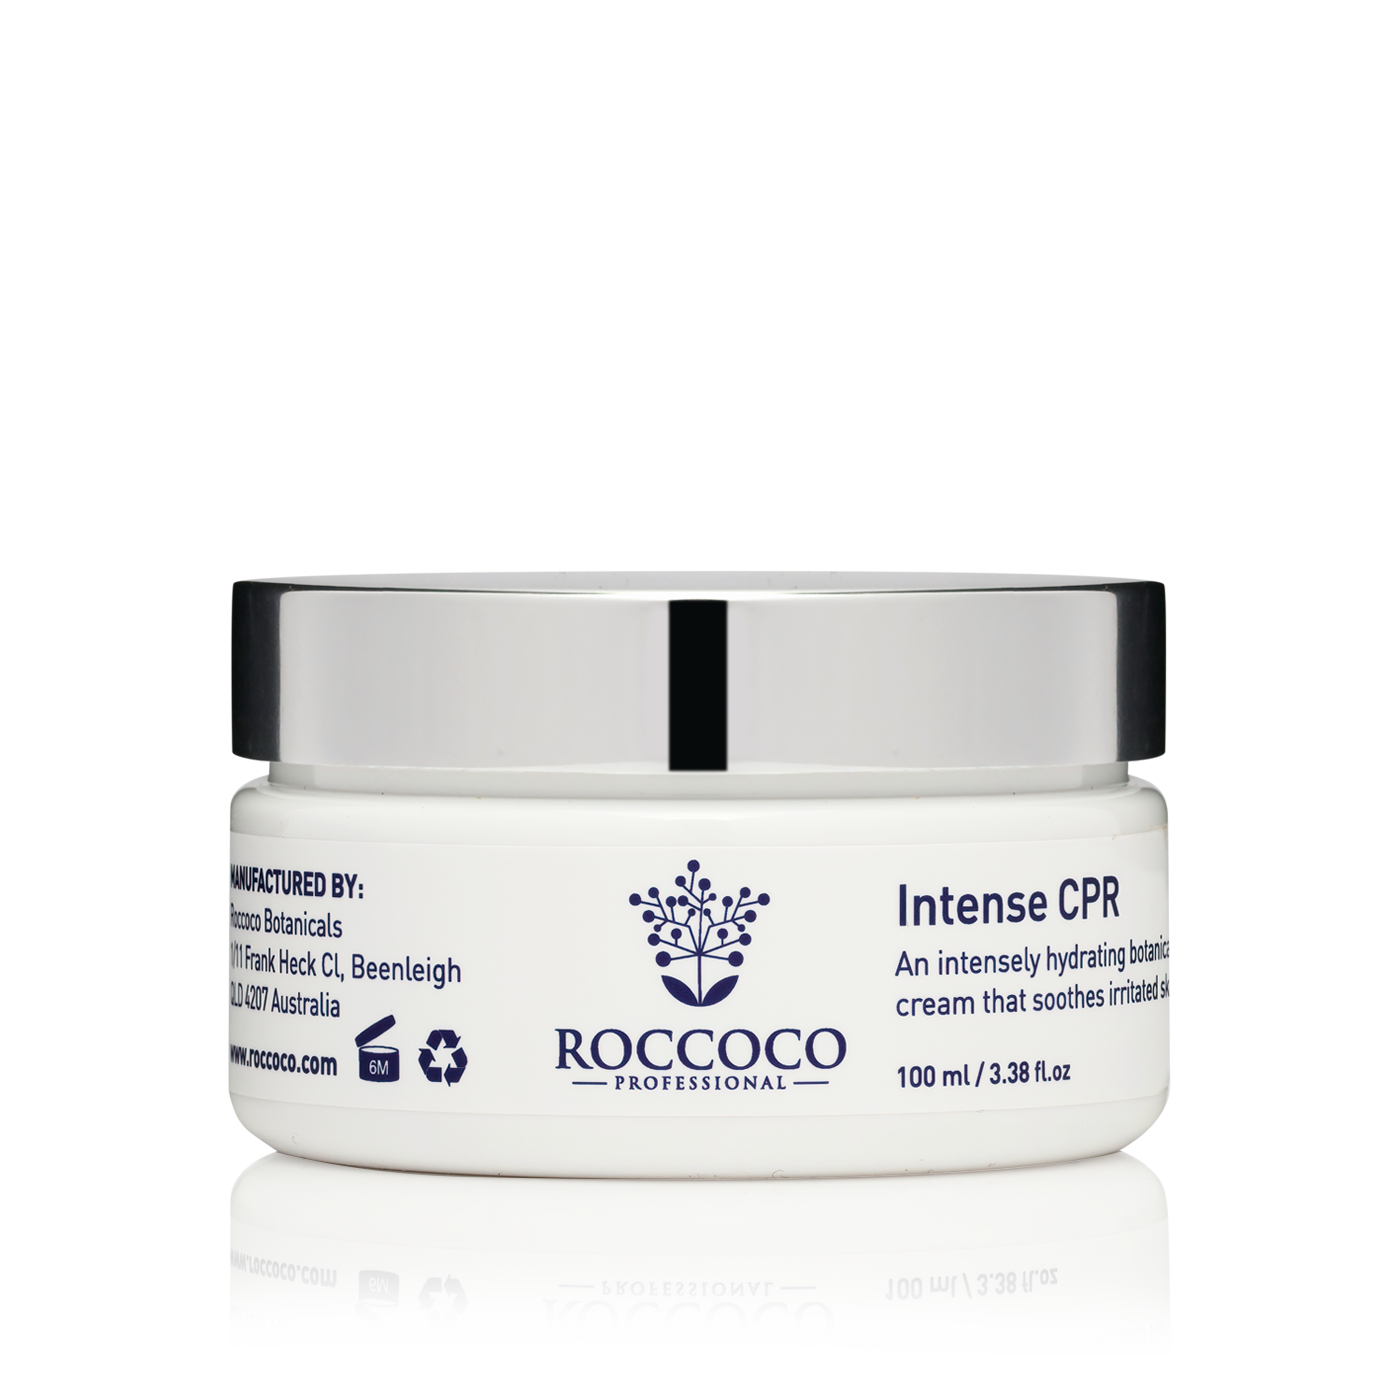 Roccoco Botanicals Intense CPR - Click to Buy!